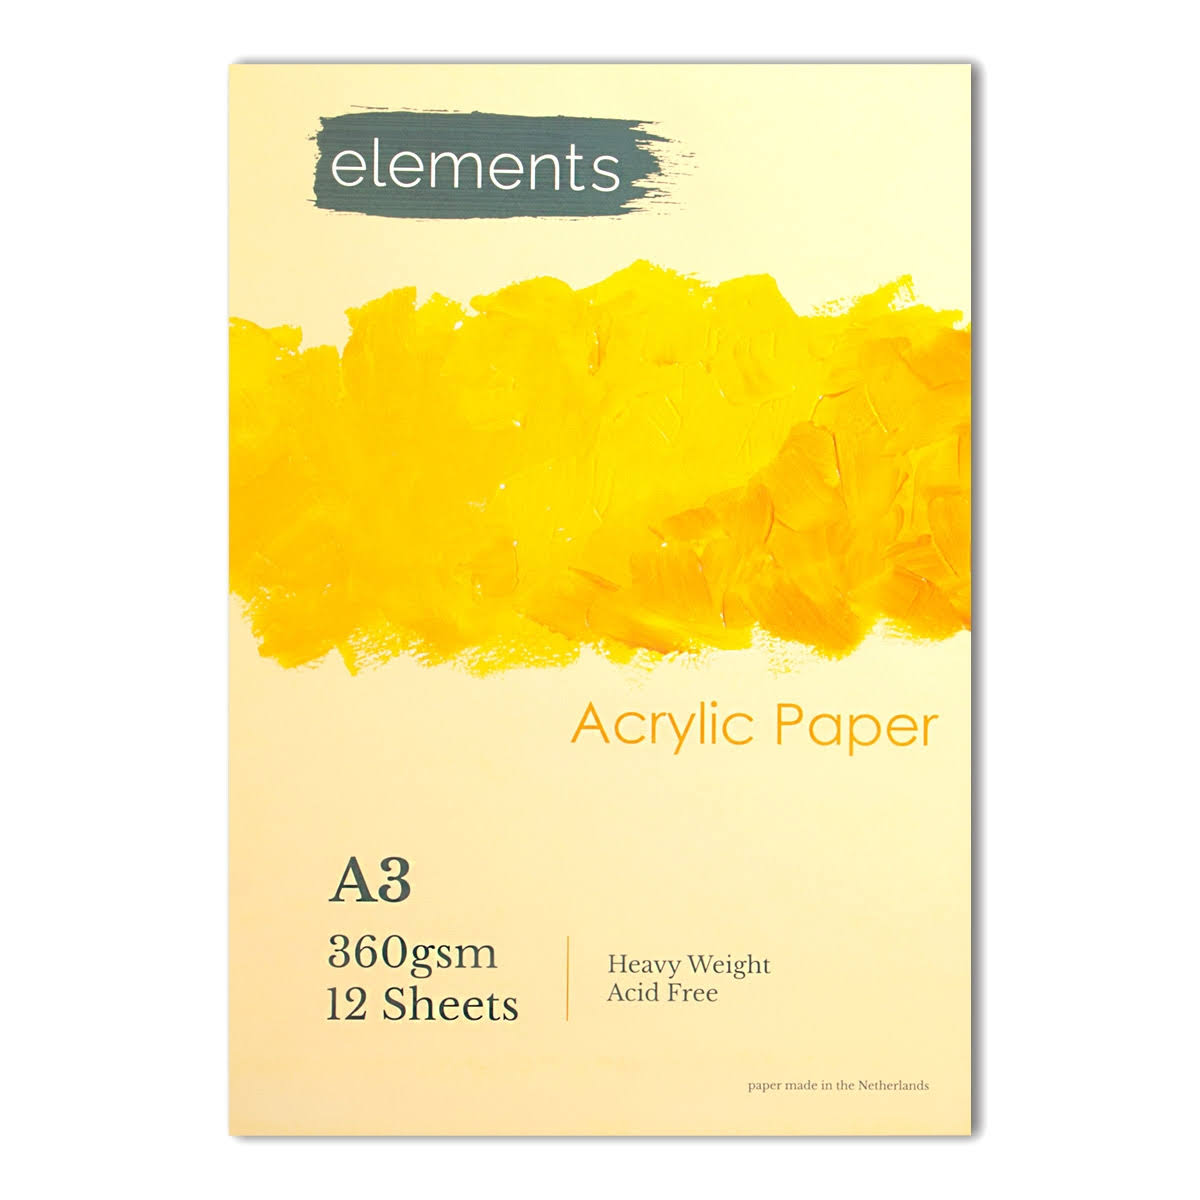 Elements Acrylic Pad - 360gsm - 12 Sheets - A3